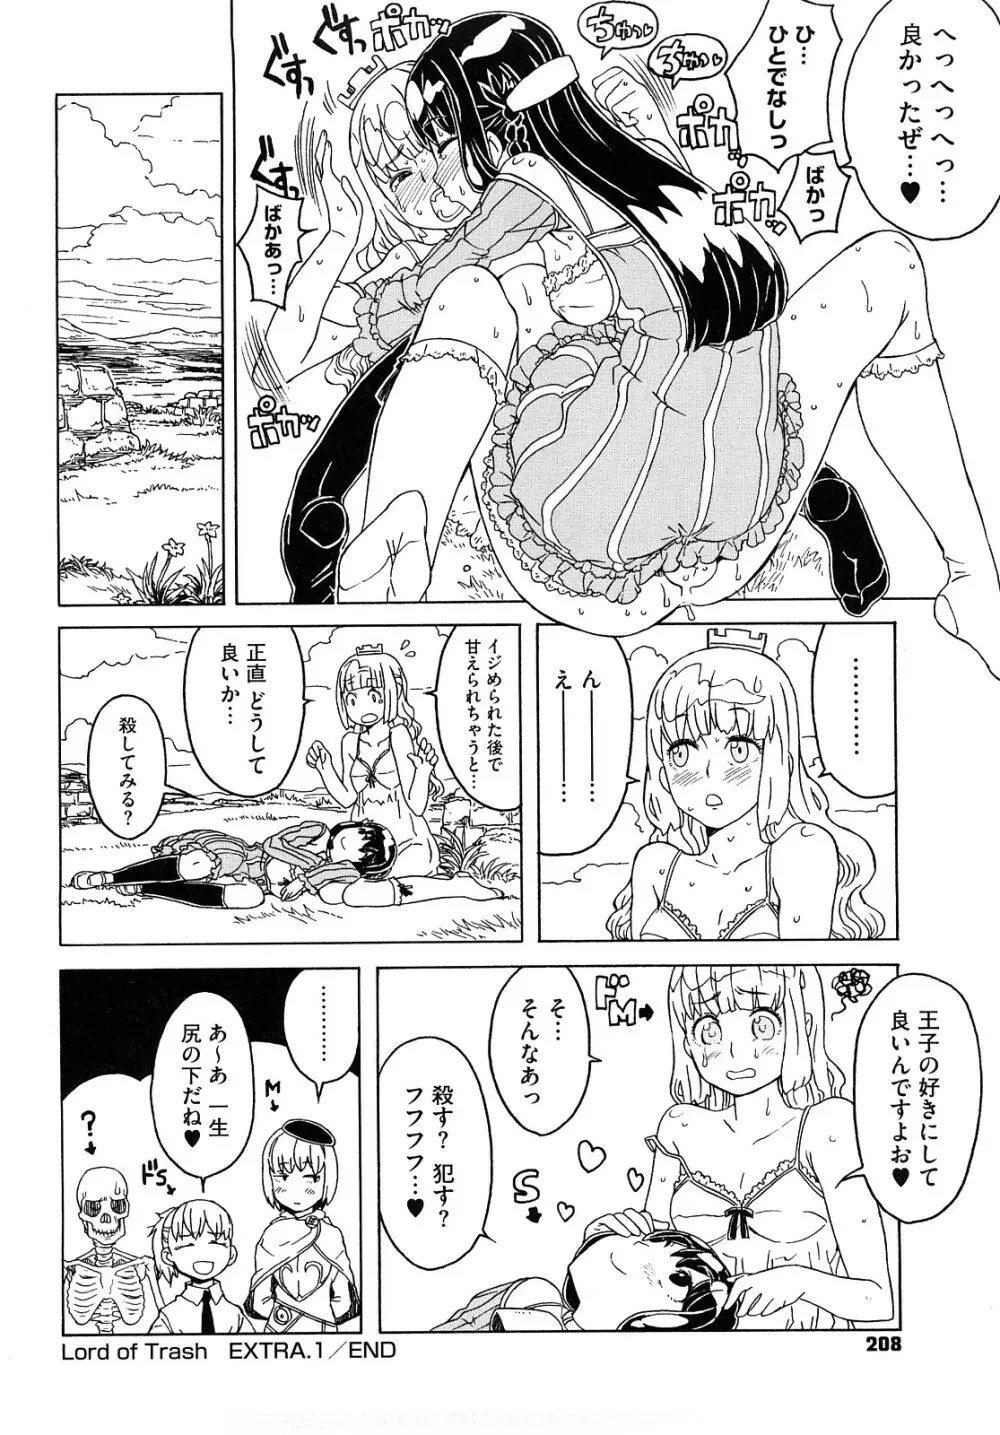 Lord of Trash 完全版 Page.207